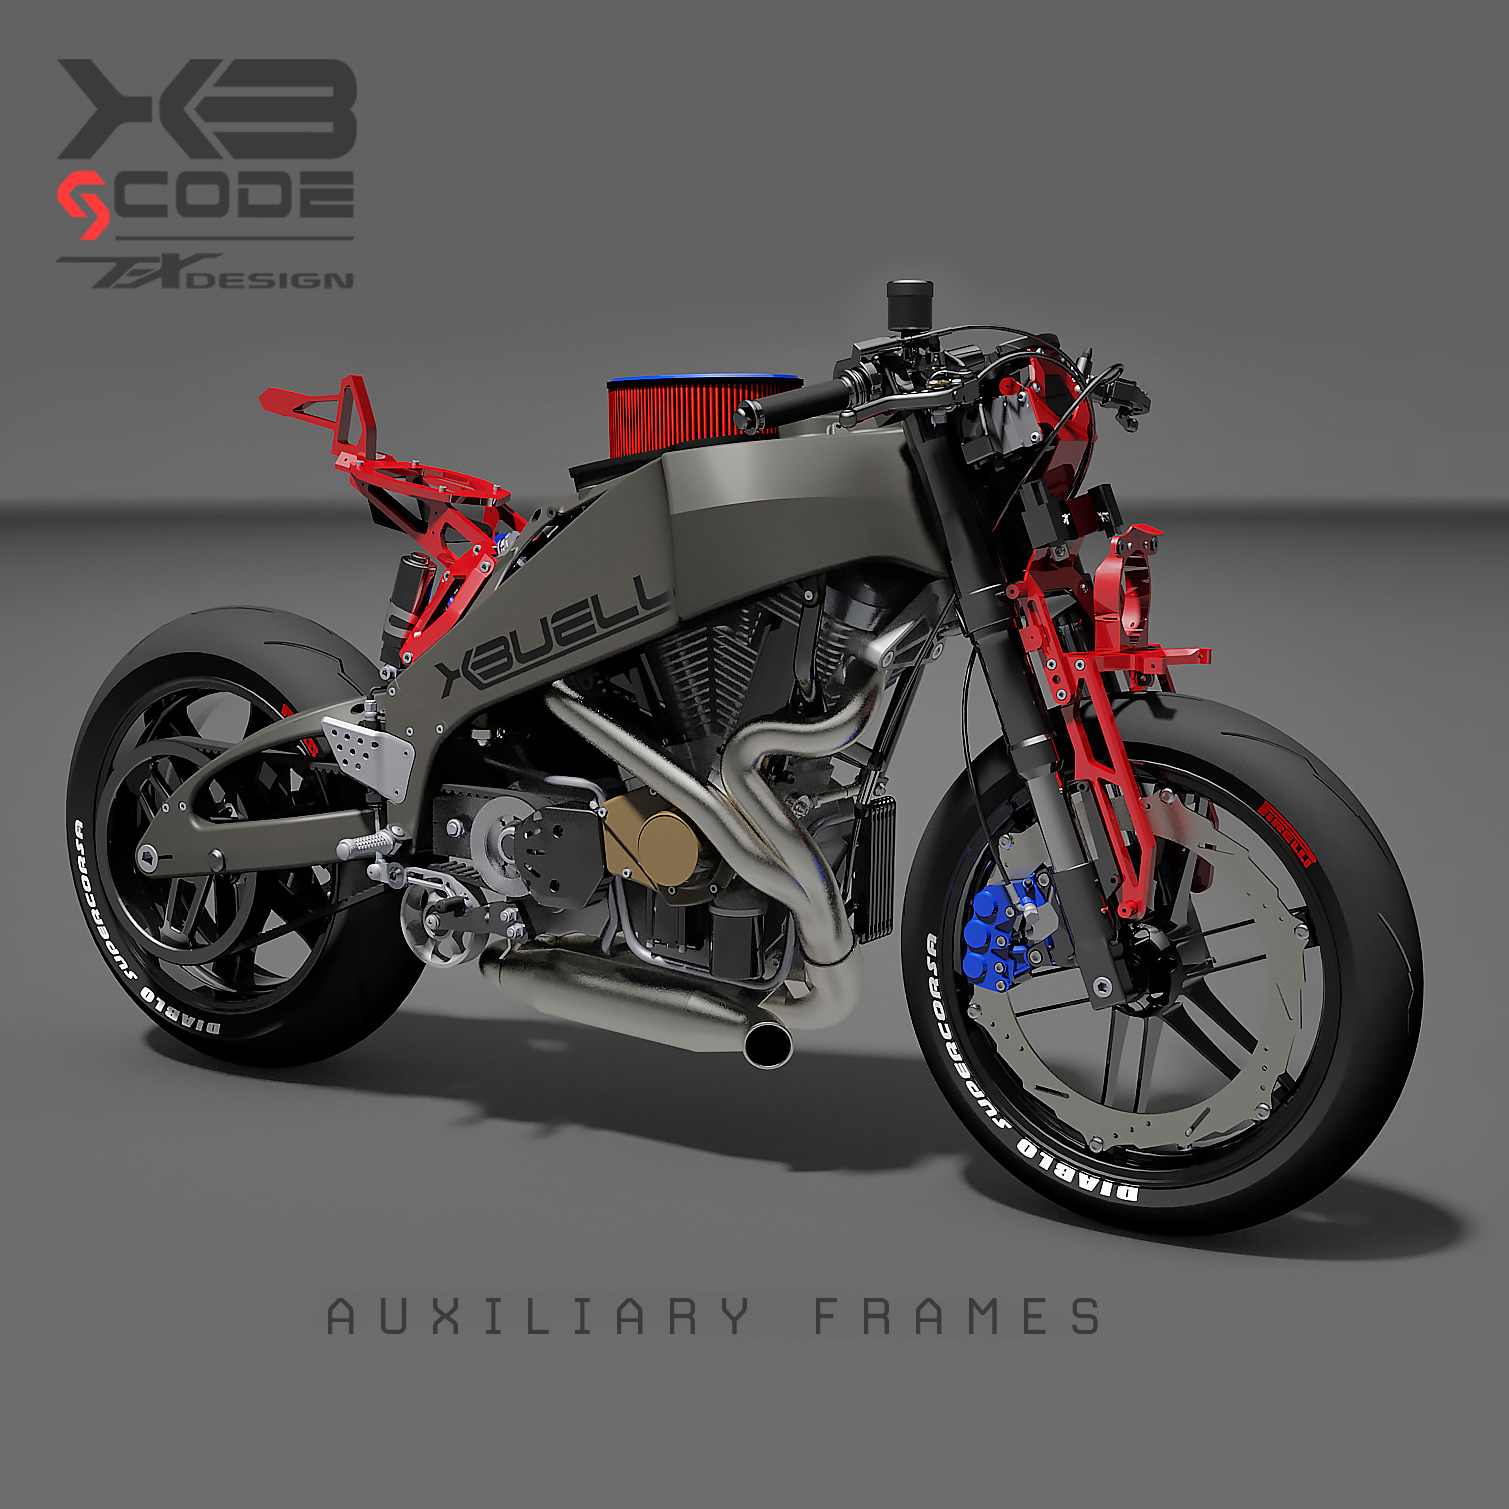 Paolo Tex Design XB gcode 1.2 Bodykit for Buell XB12